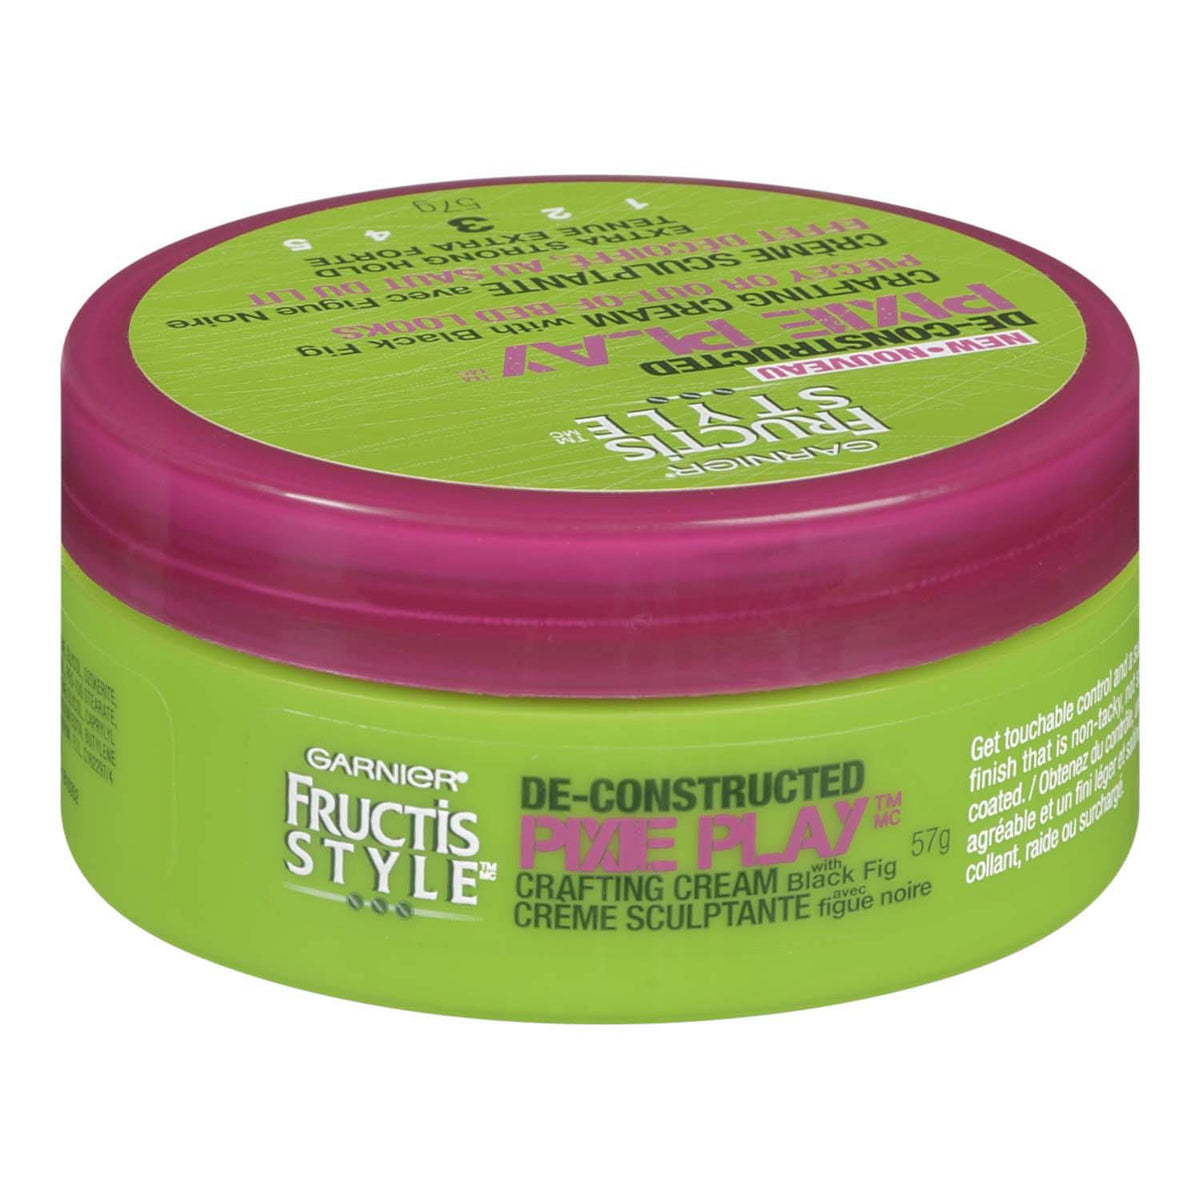 Garnier Fructis Style De-Constructed, Pixie Play Crafting Cream with Black Fig, 57 g